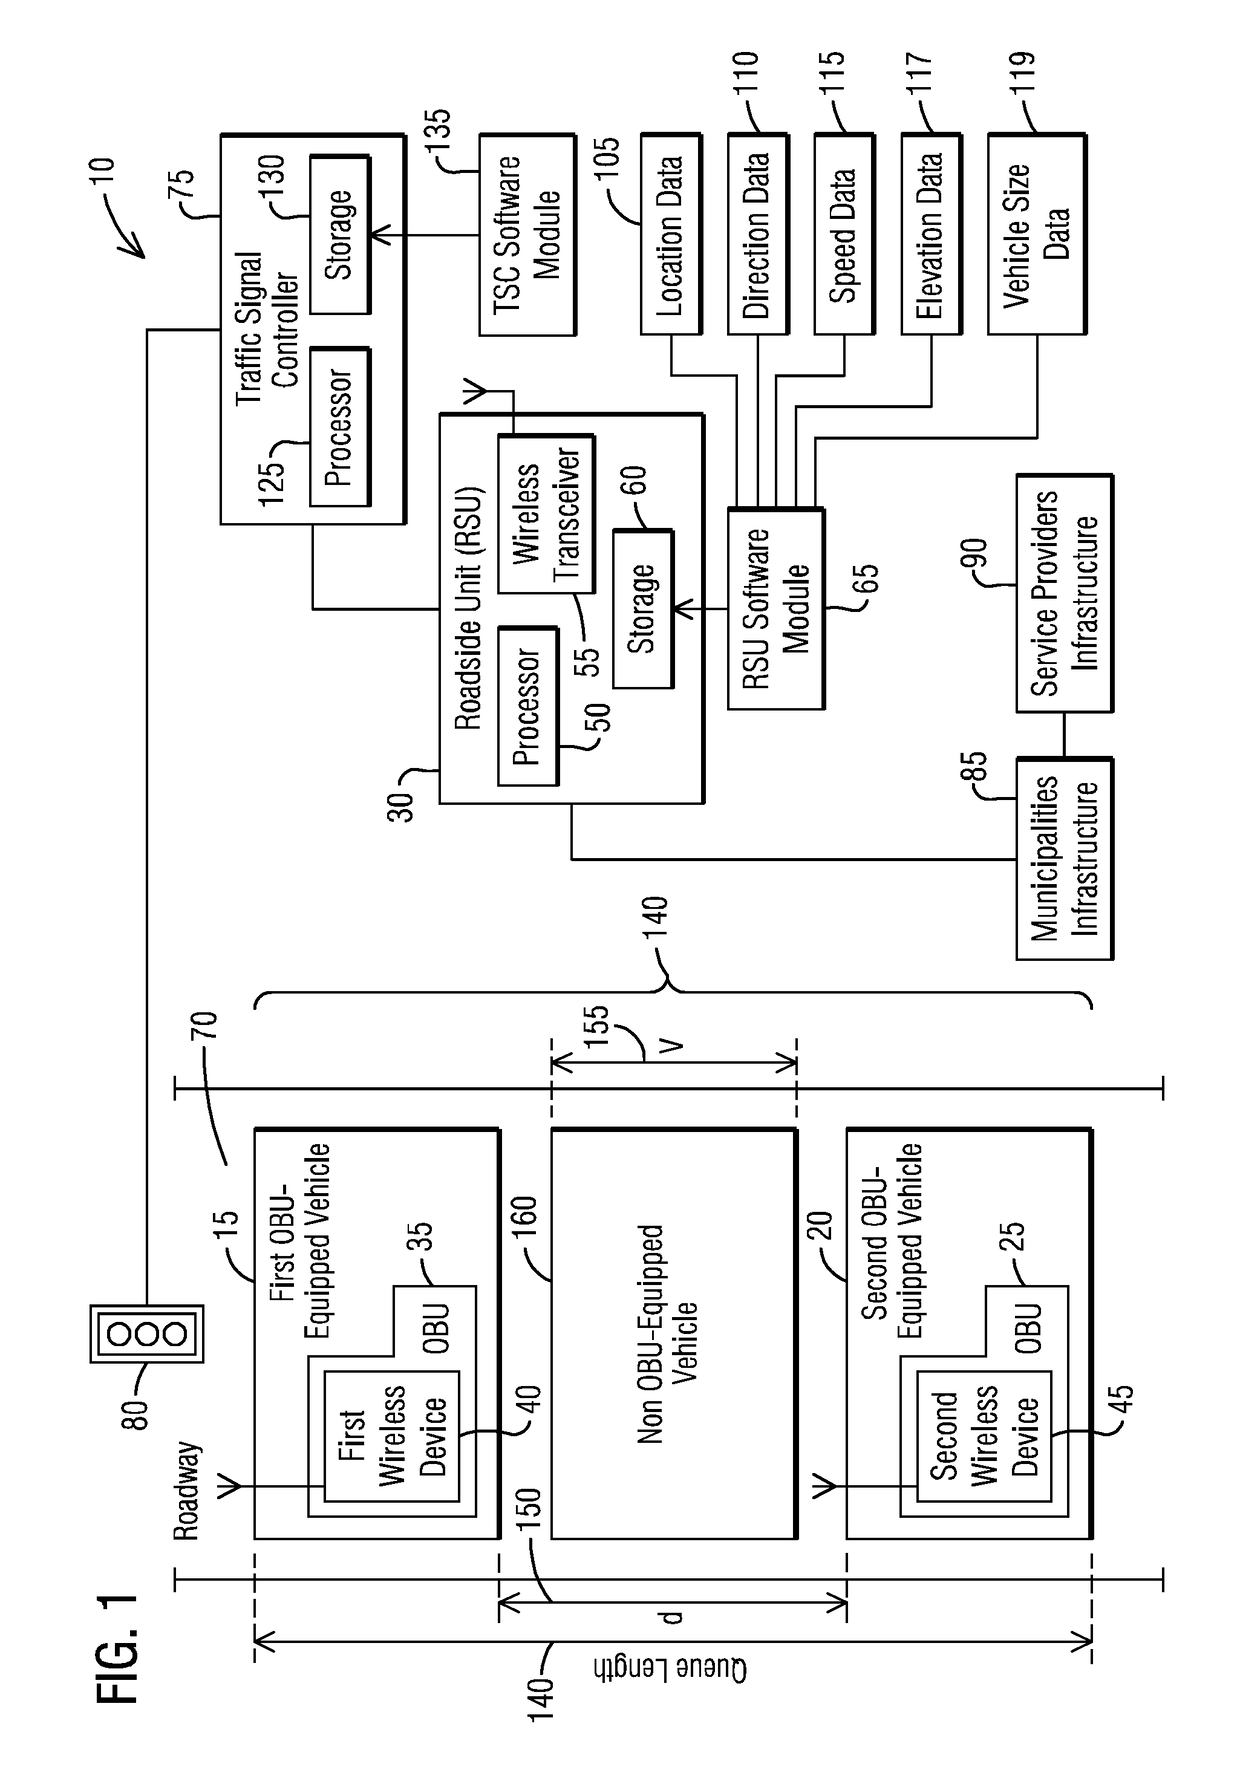 Systems and methods to detect vehicle queue lengths of vehicles stopped at a traffic light signal